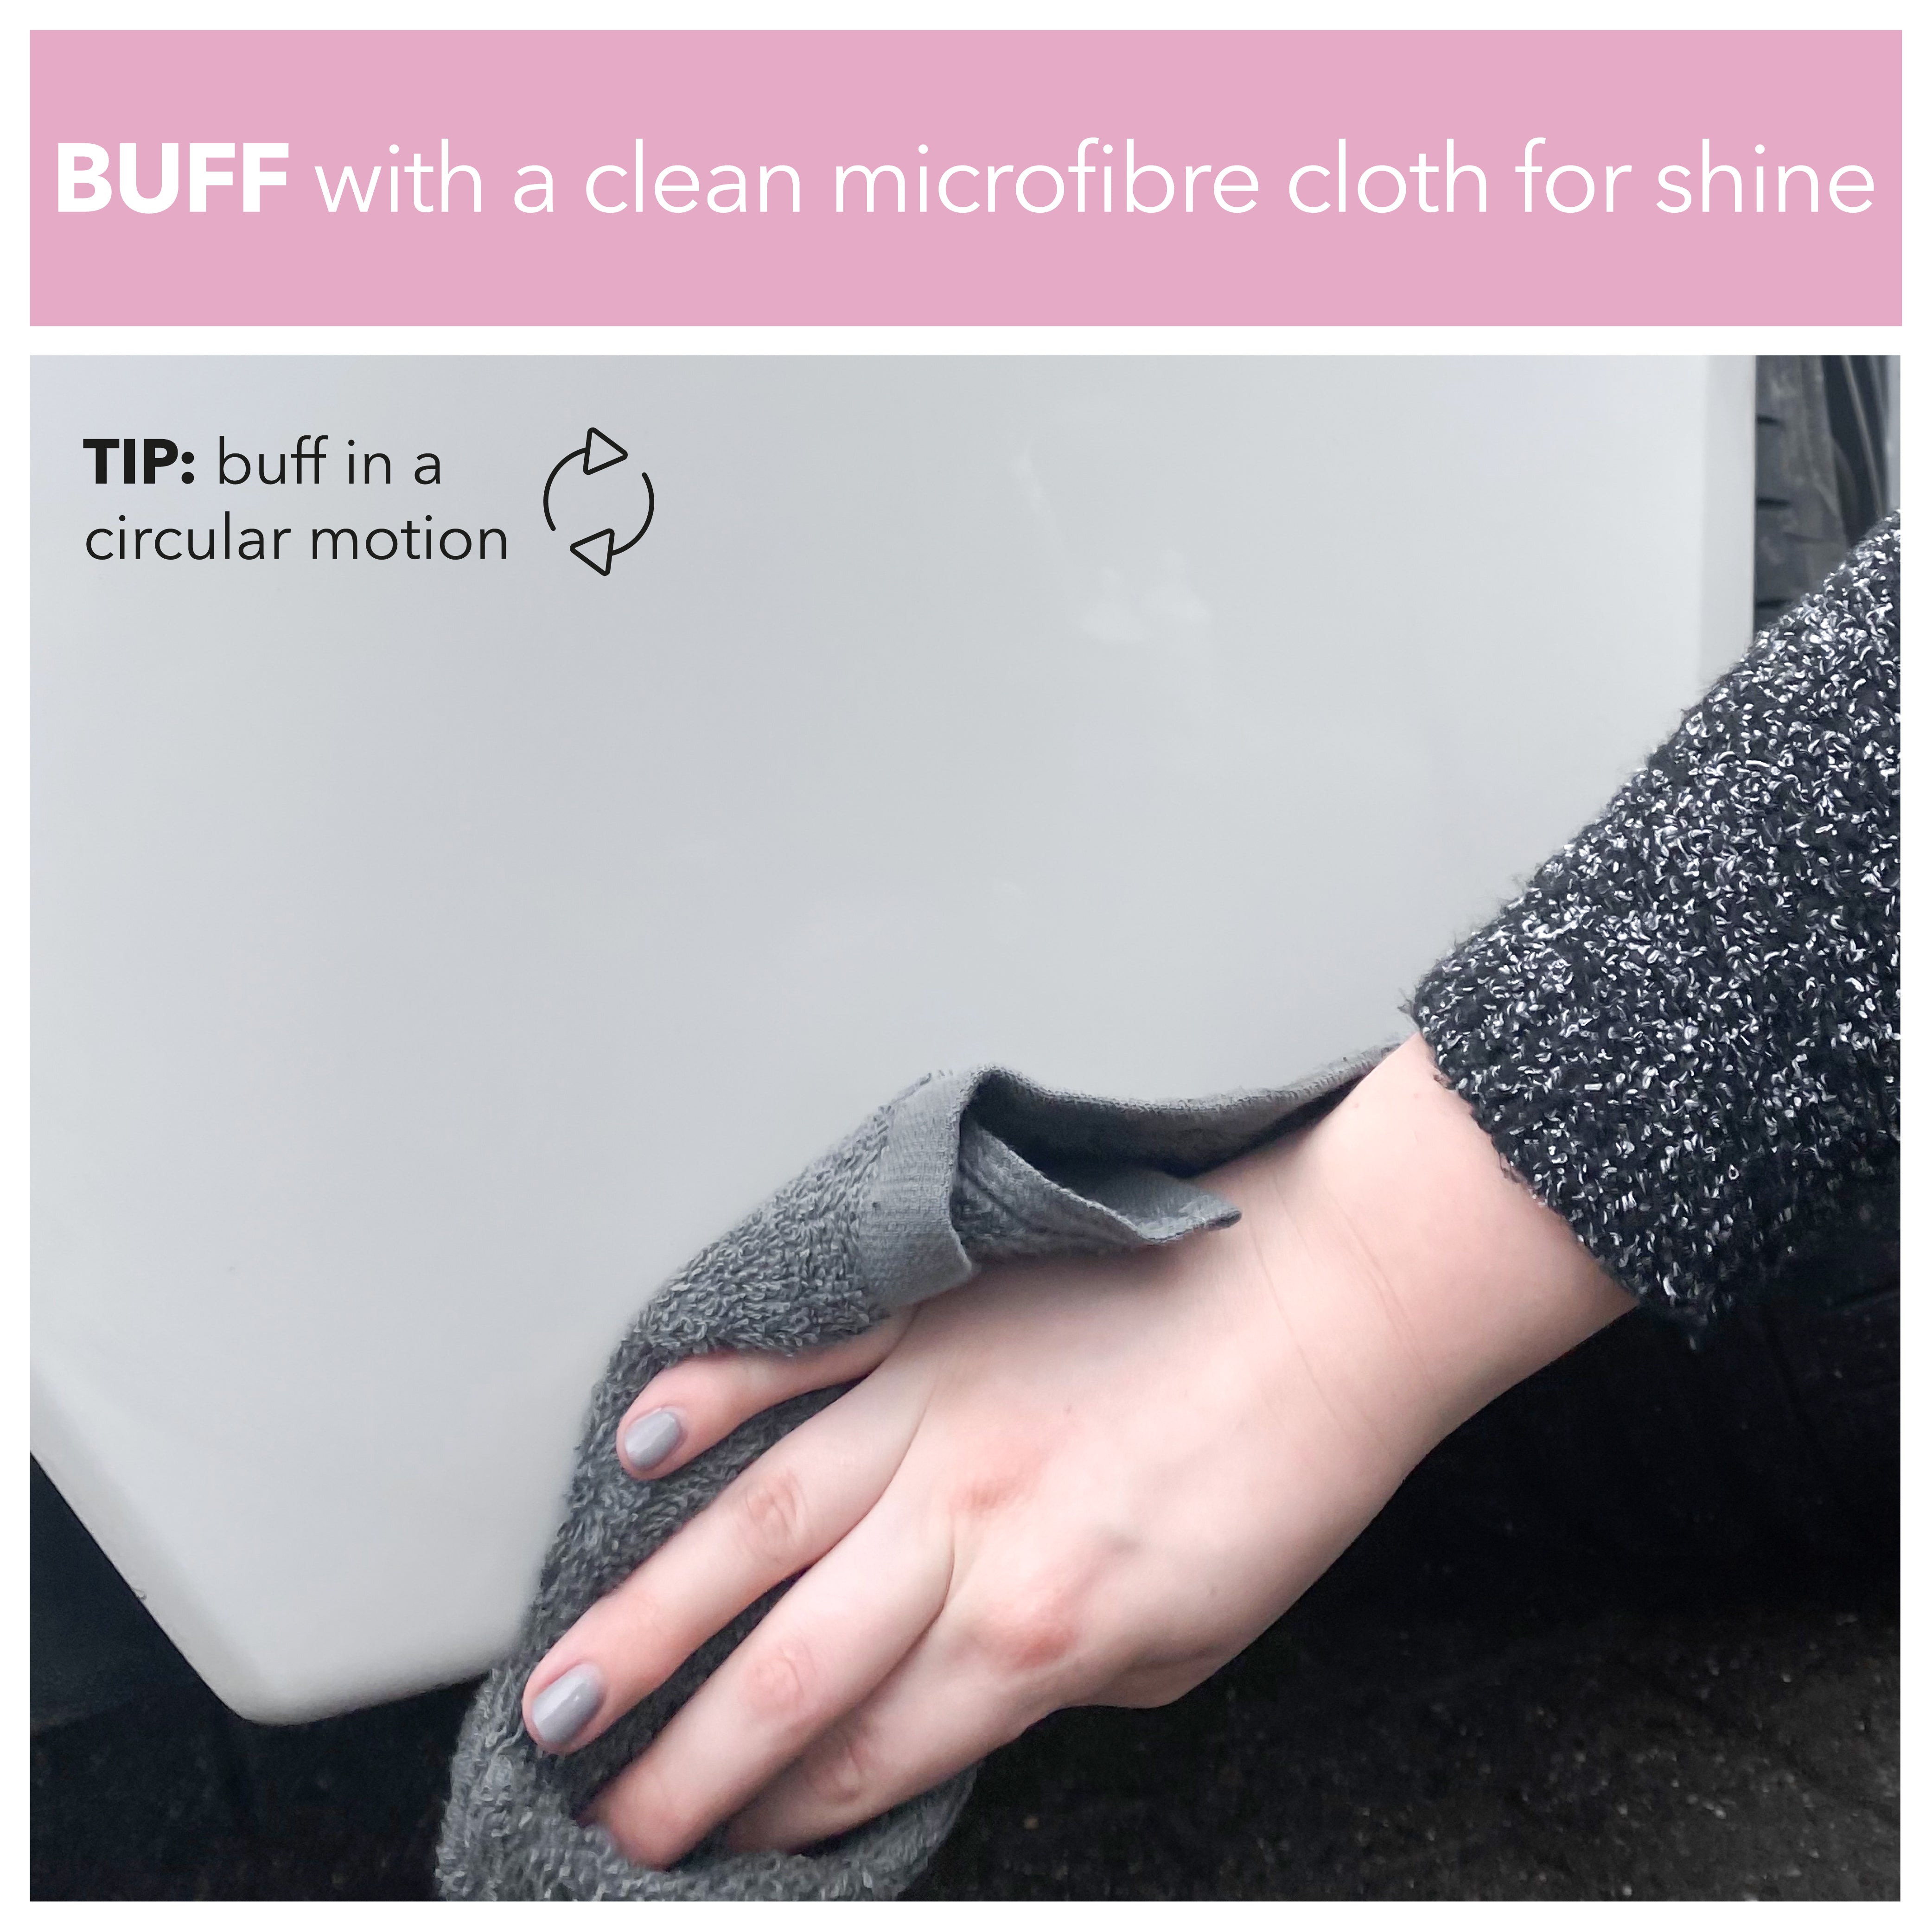 Buff with a clean microfibre cloth for shine